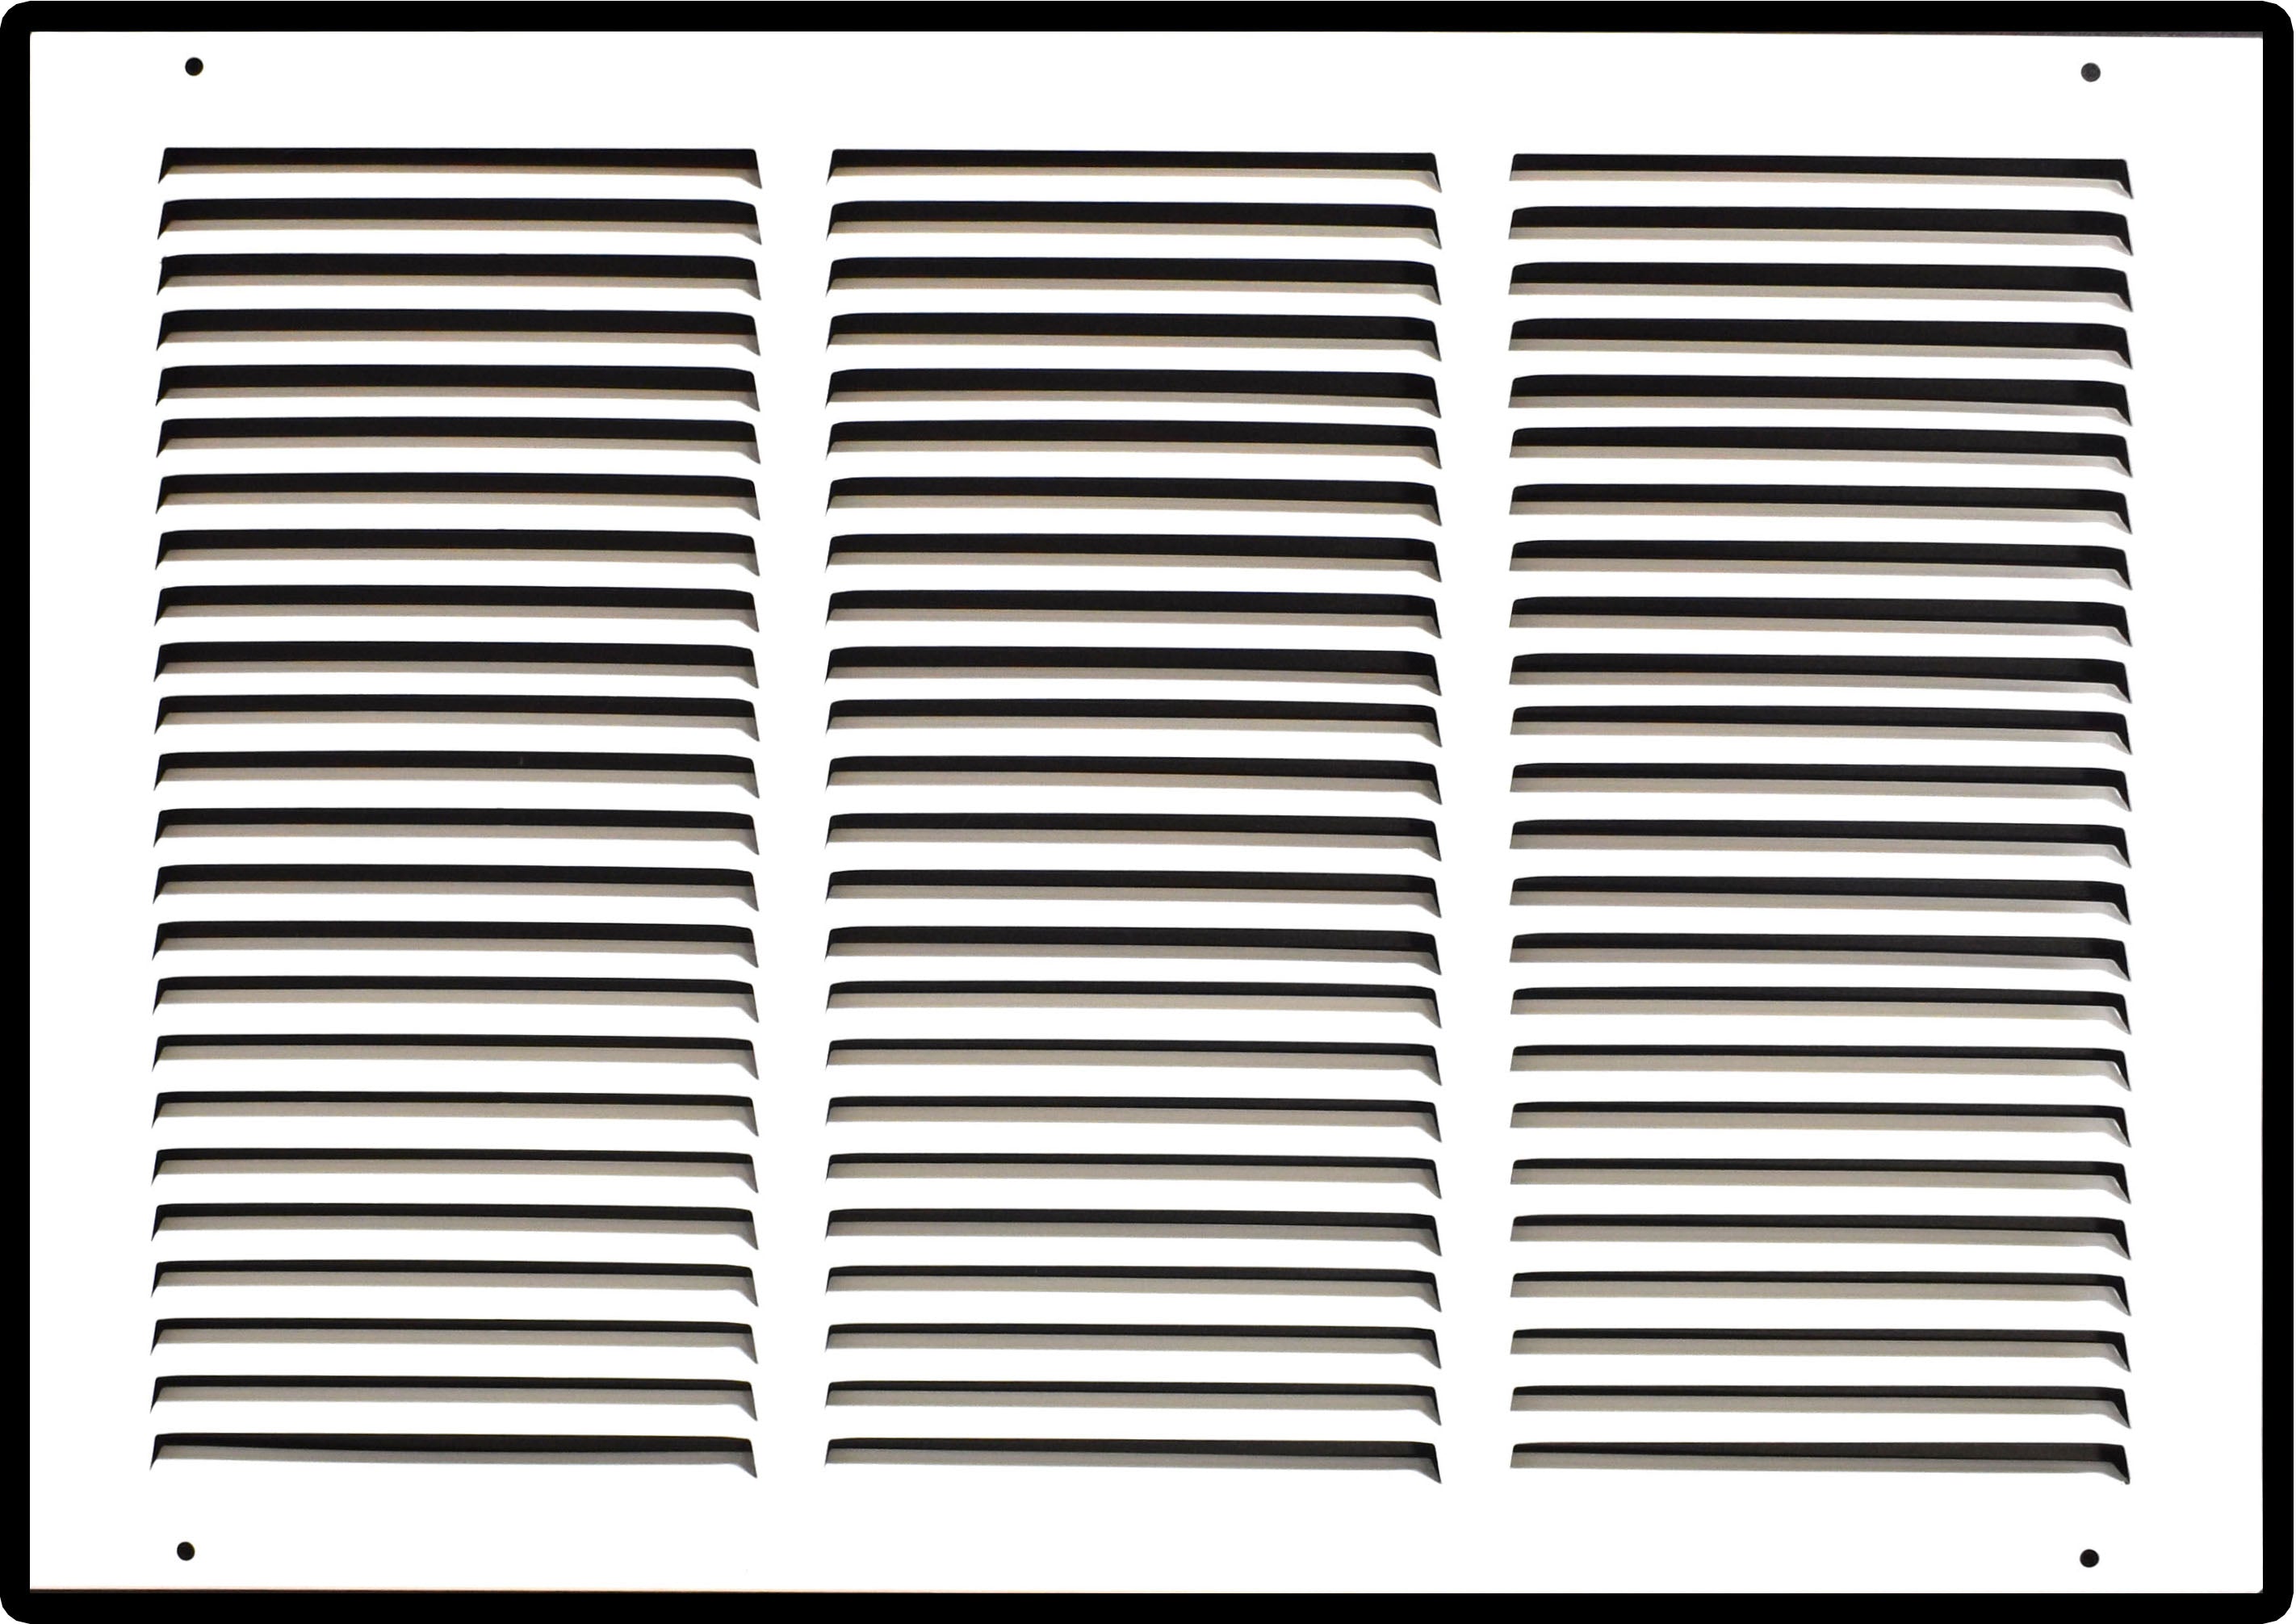 airgrilles 18" x 12" duct opening   hd steel return air grille for sidewall and ceiling  agc  7agc-flt-wh-18x12 756014649574 - 1